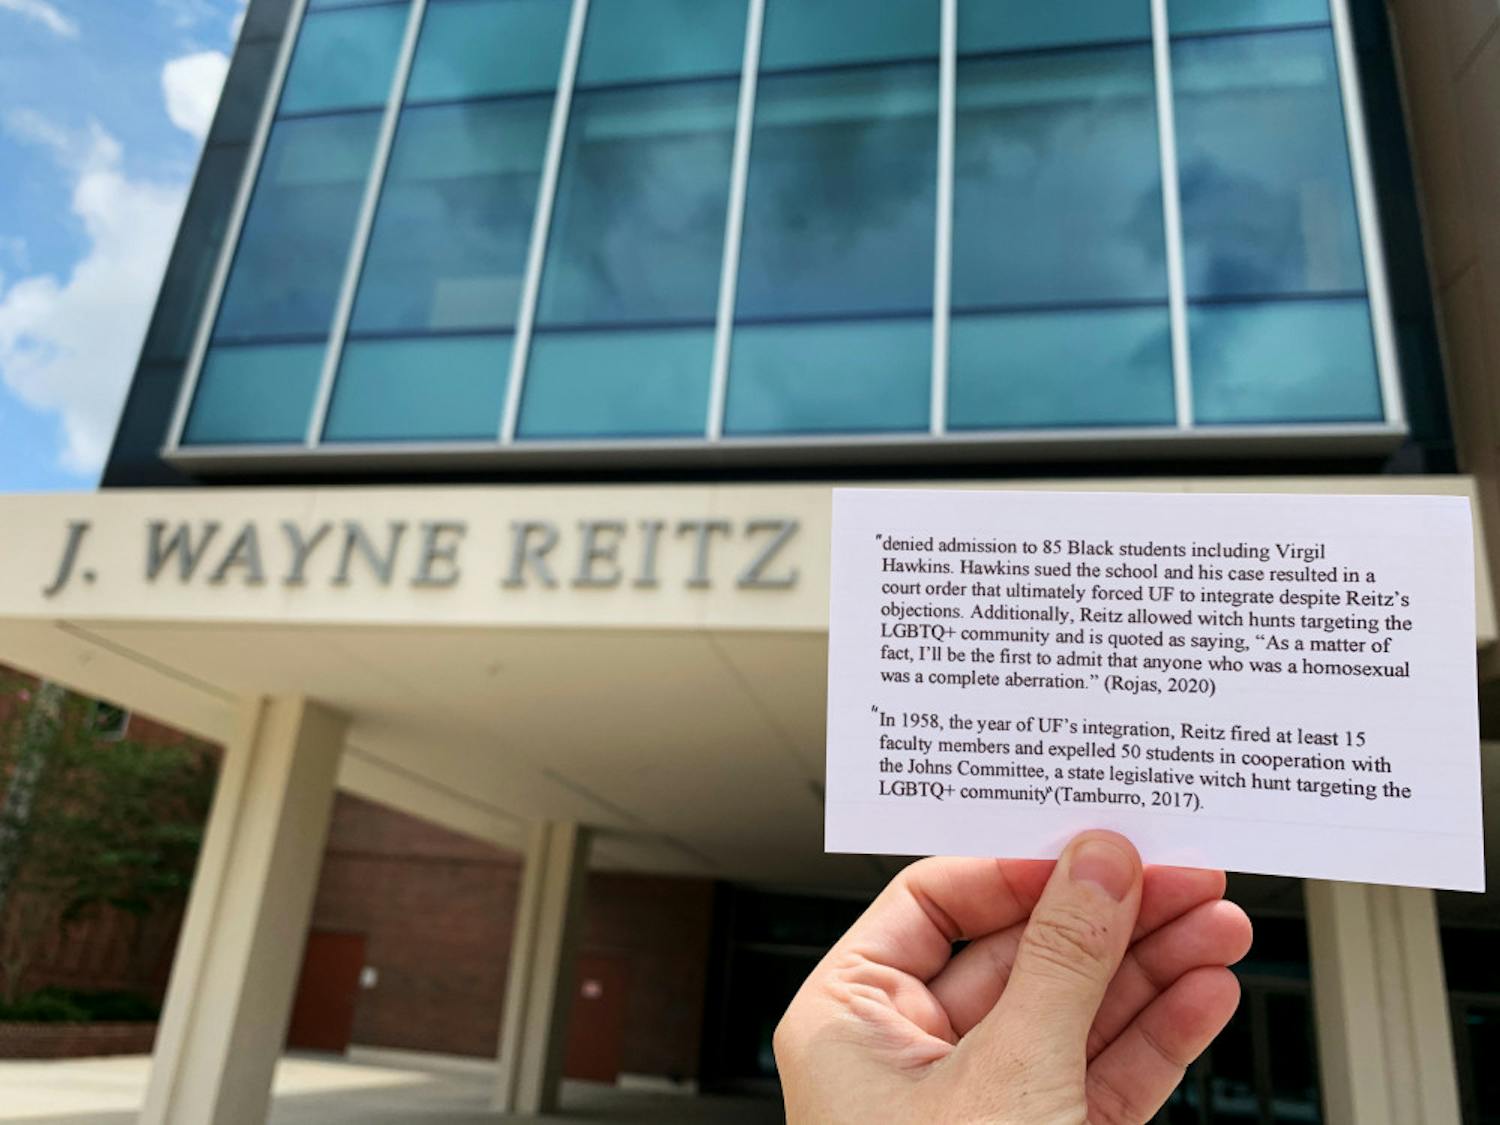 Shelby Boehm, a 28-year-old UF English education Ph.D. student, holds up a piece of paper highlighting J. Wayne Reitz' controversial history with the Reitz Union sign visible in the background. She got the information from Anthony Rojas' petition, and said she took the photos while walking around campus because she wanted to do her part in spreading the information to other students and faculty. The photos were posted to Instagram and got hundreds of likes. 